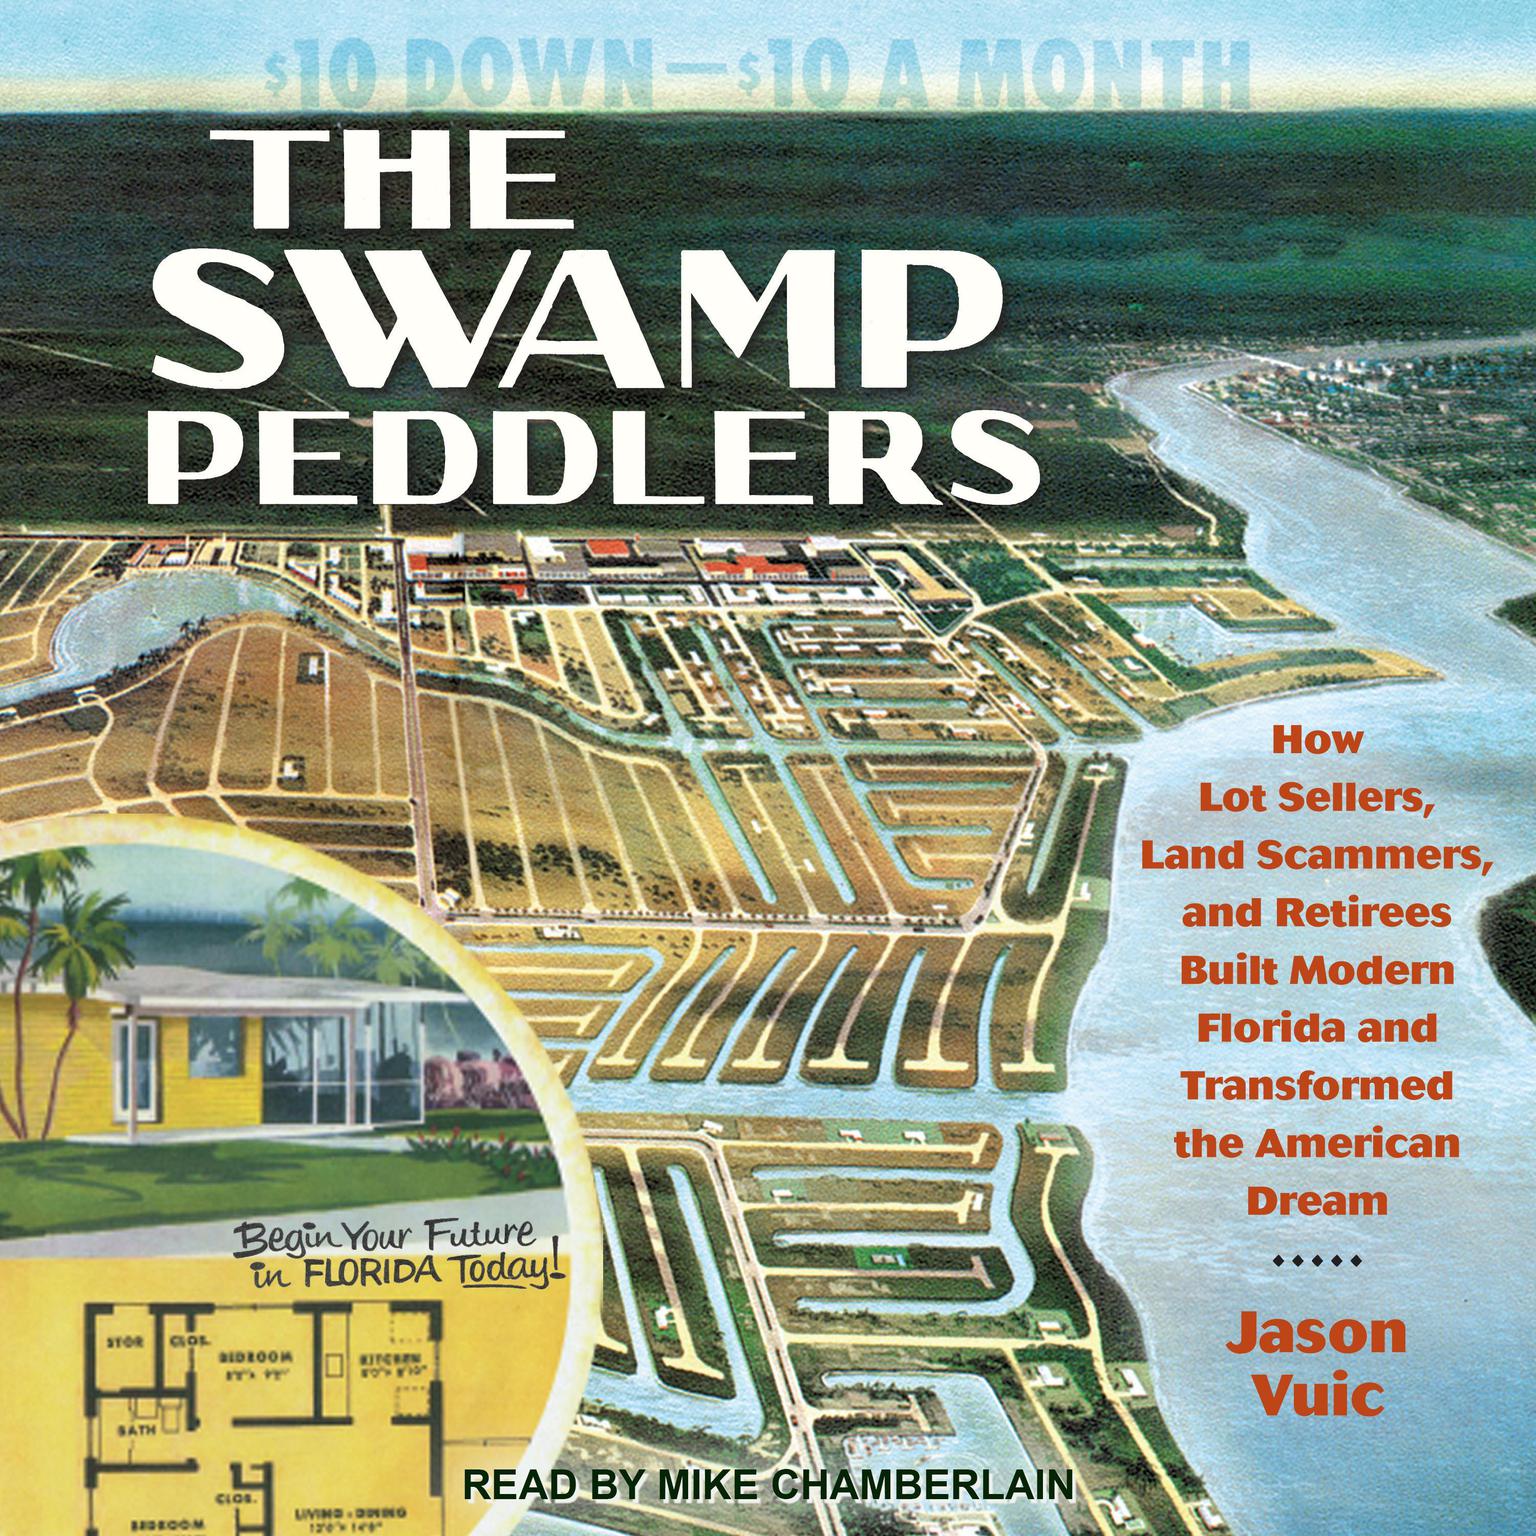 The Swamp Peddlers: How Lot Sellers, Land Scammers, and Retirees Built Modern Florida and Transformed the American Dream Audiobook, by Jason Vuic